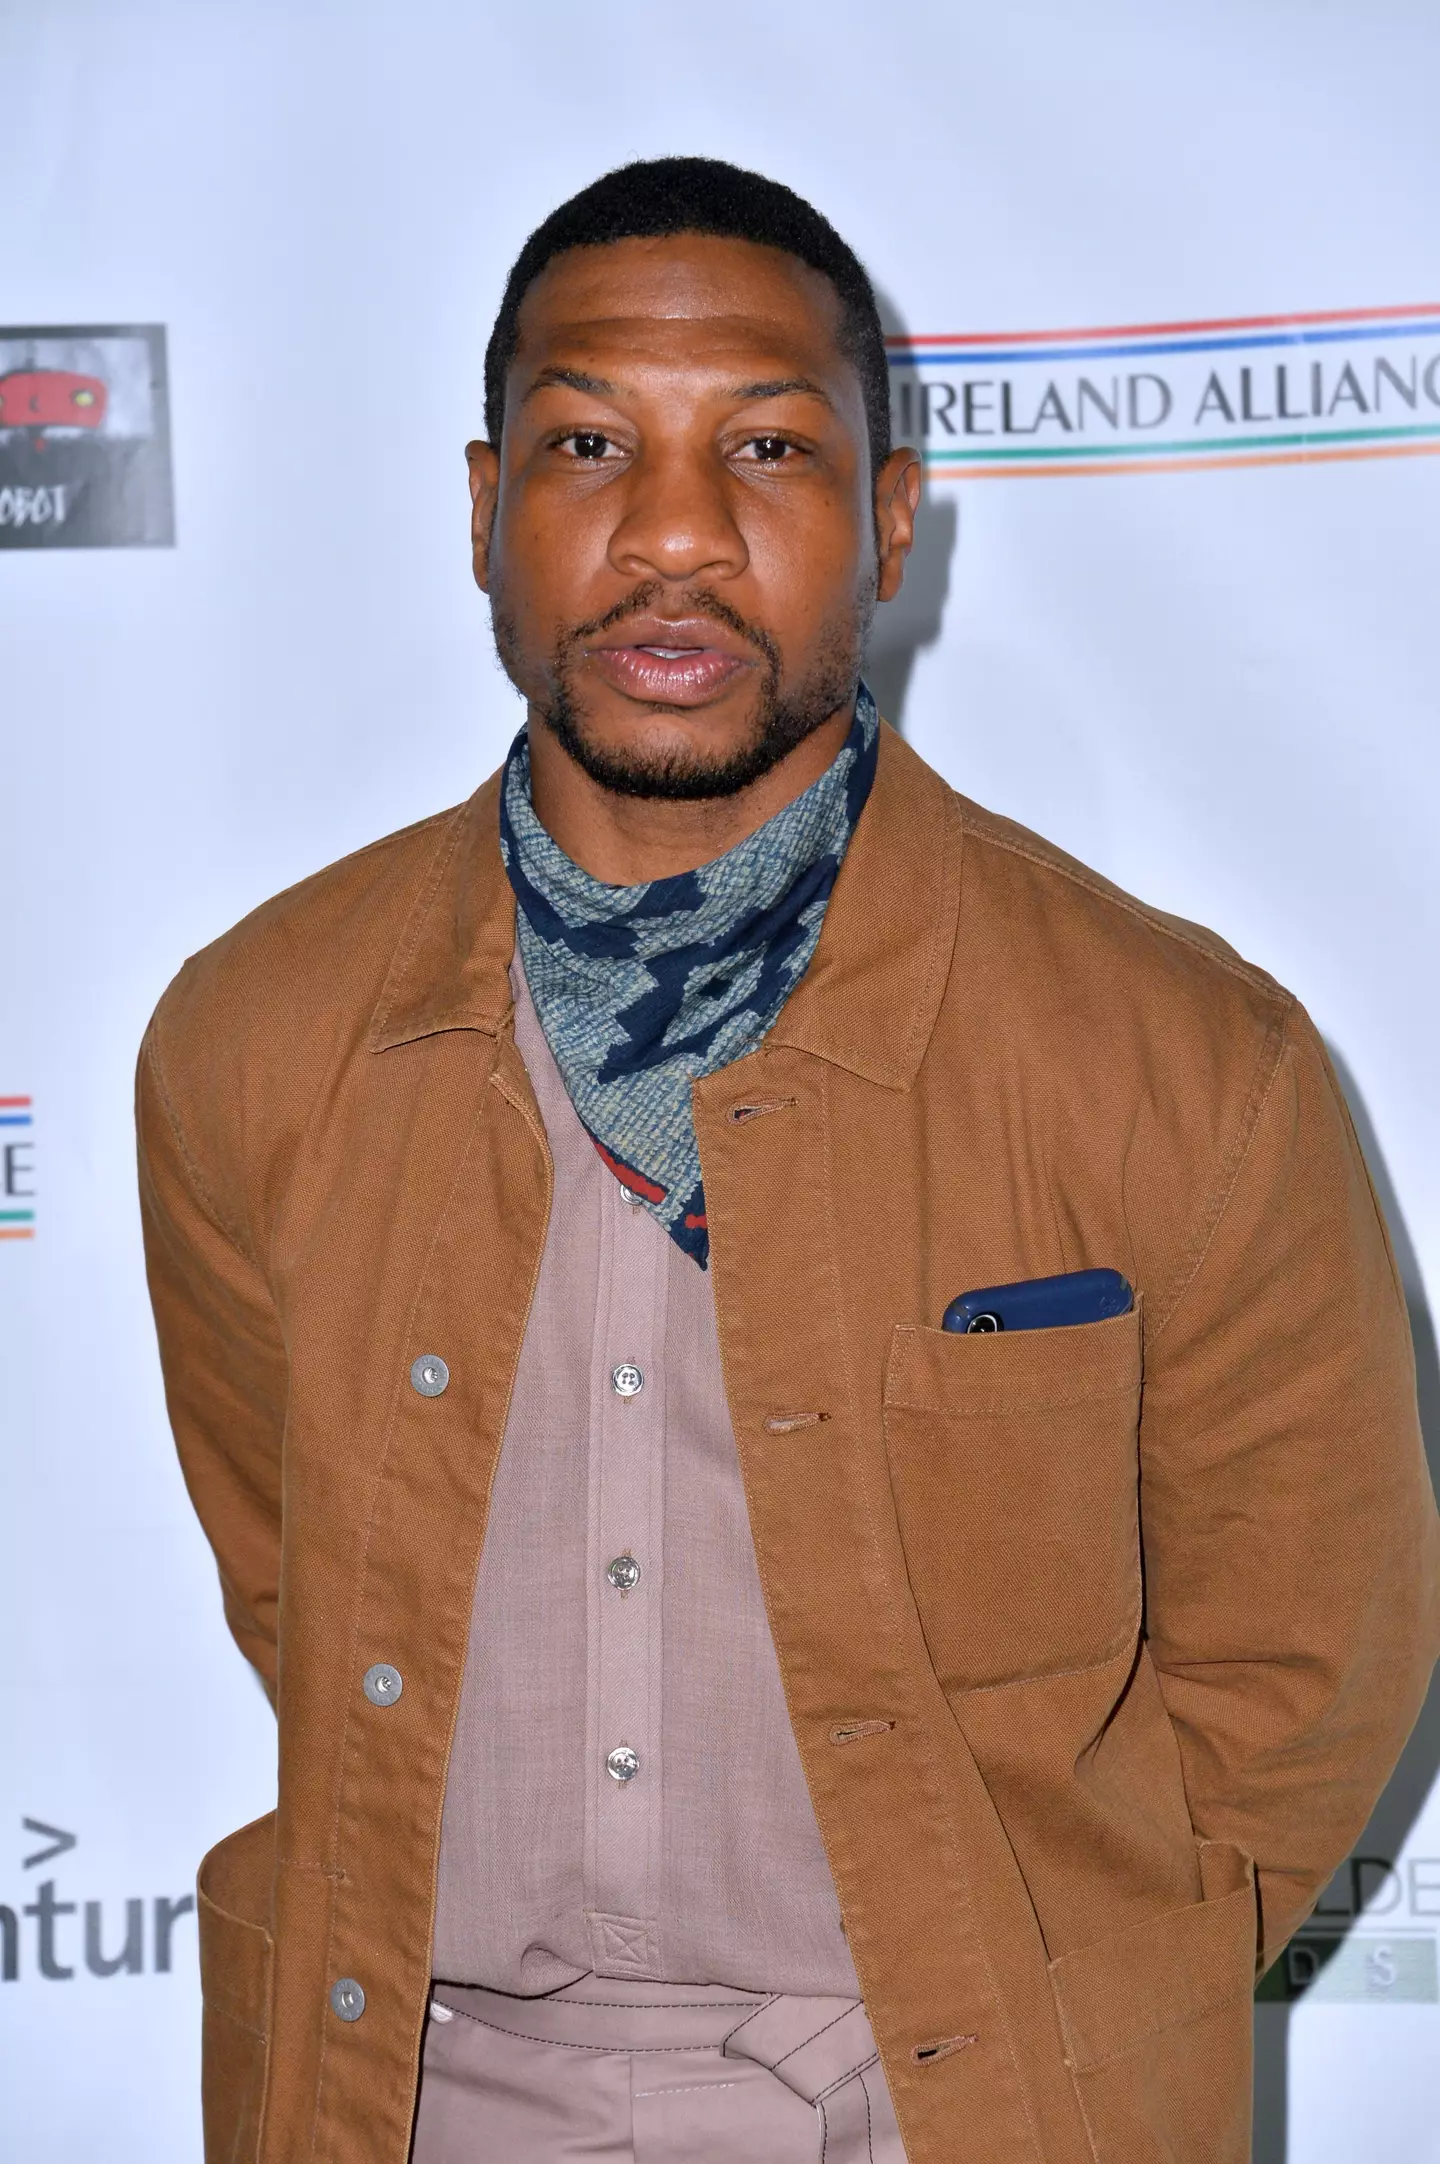 Jonathan Majors was arrested last month on assault charges.